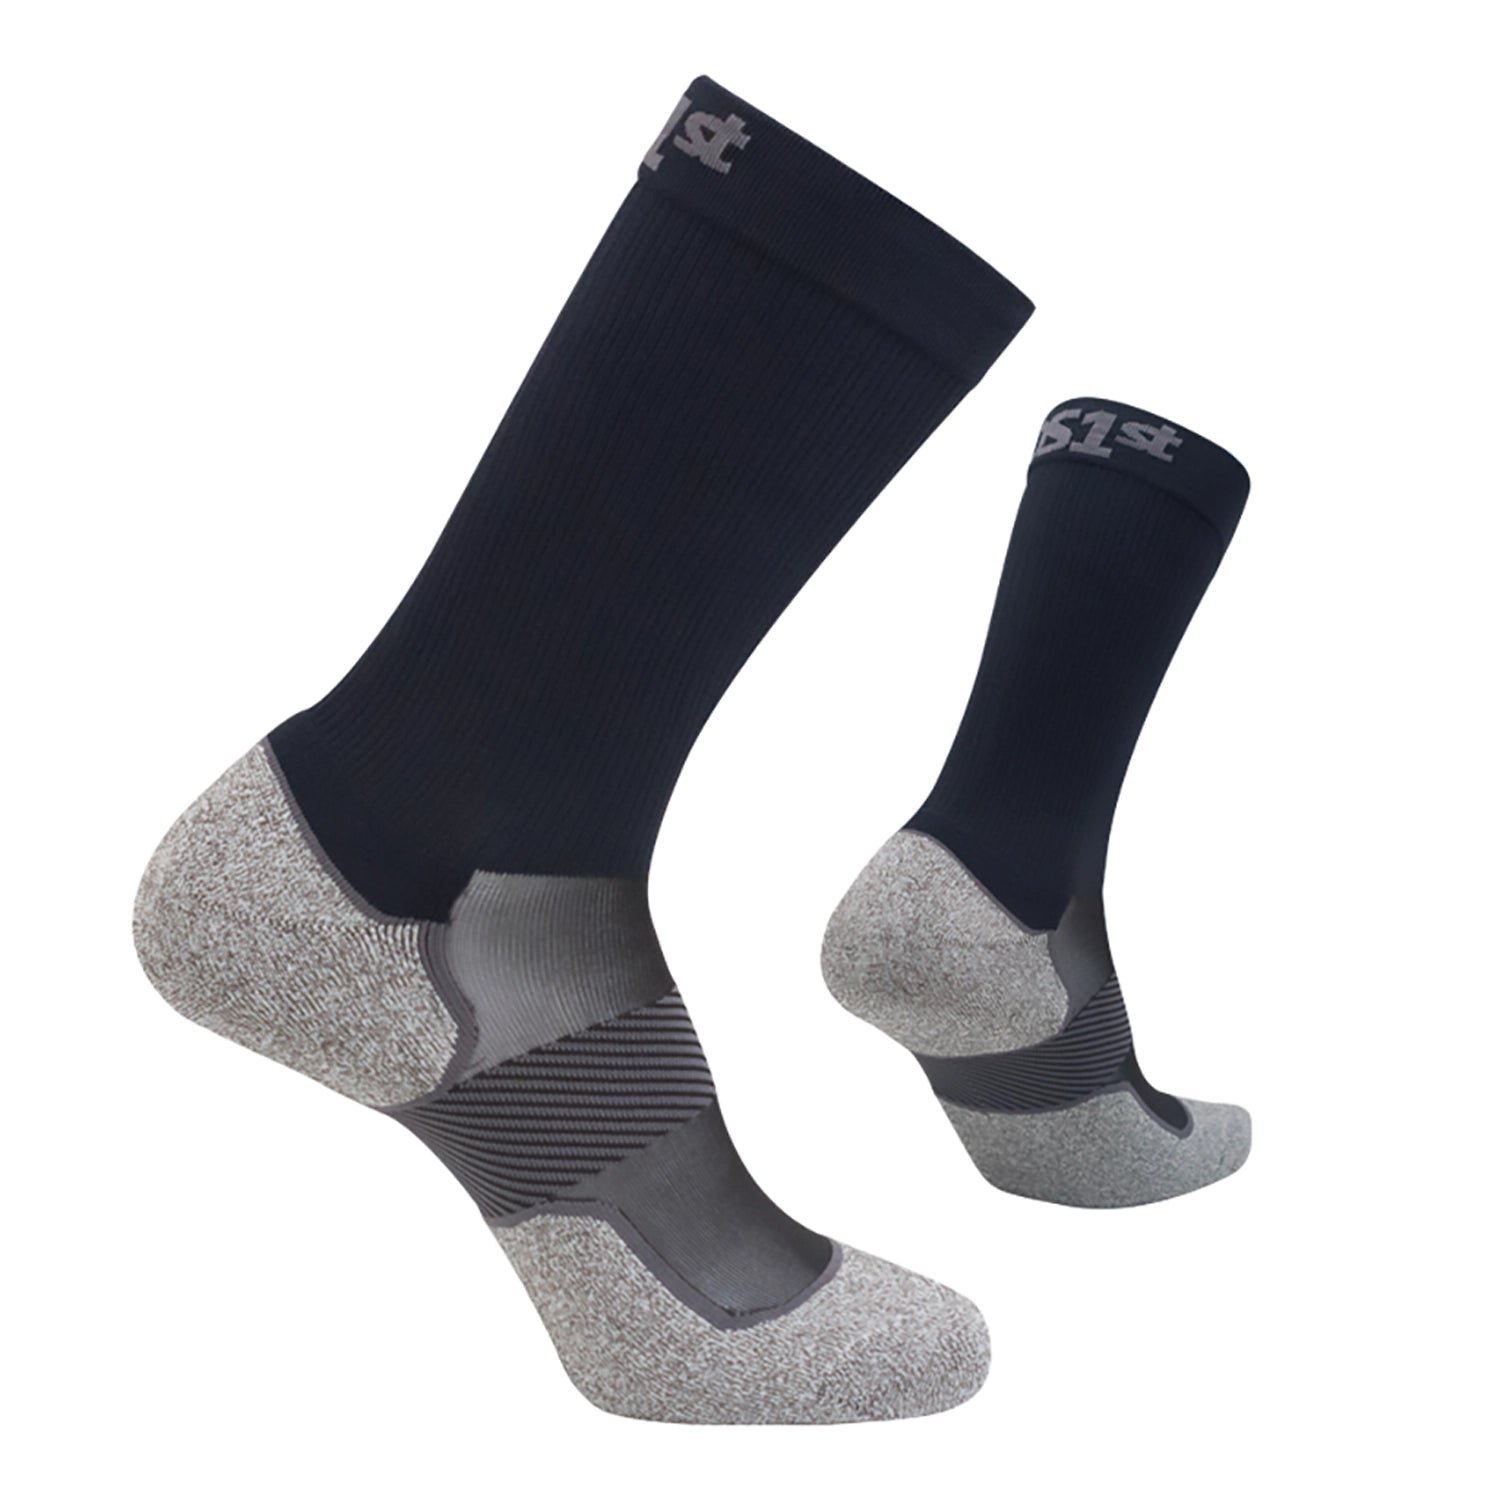 How bunion socks can improve your pickleball game